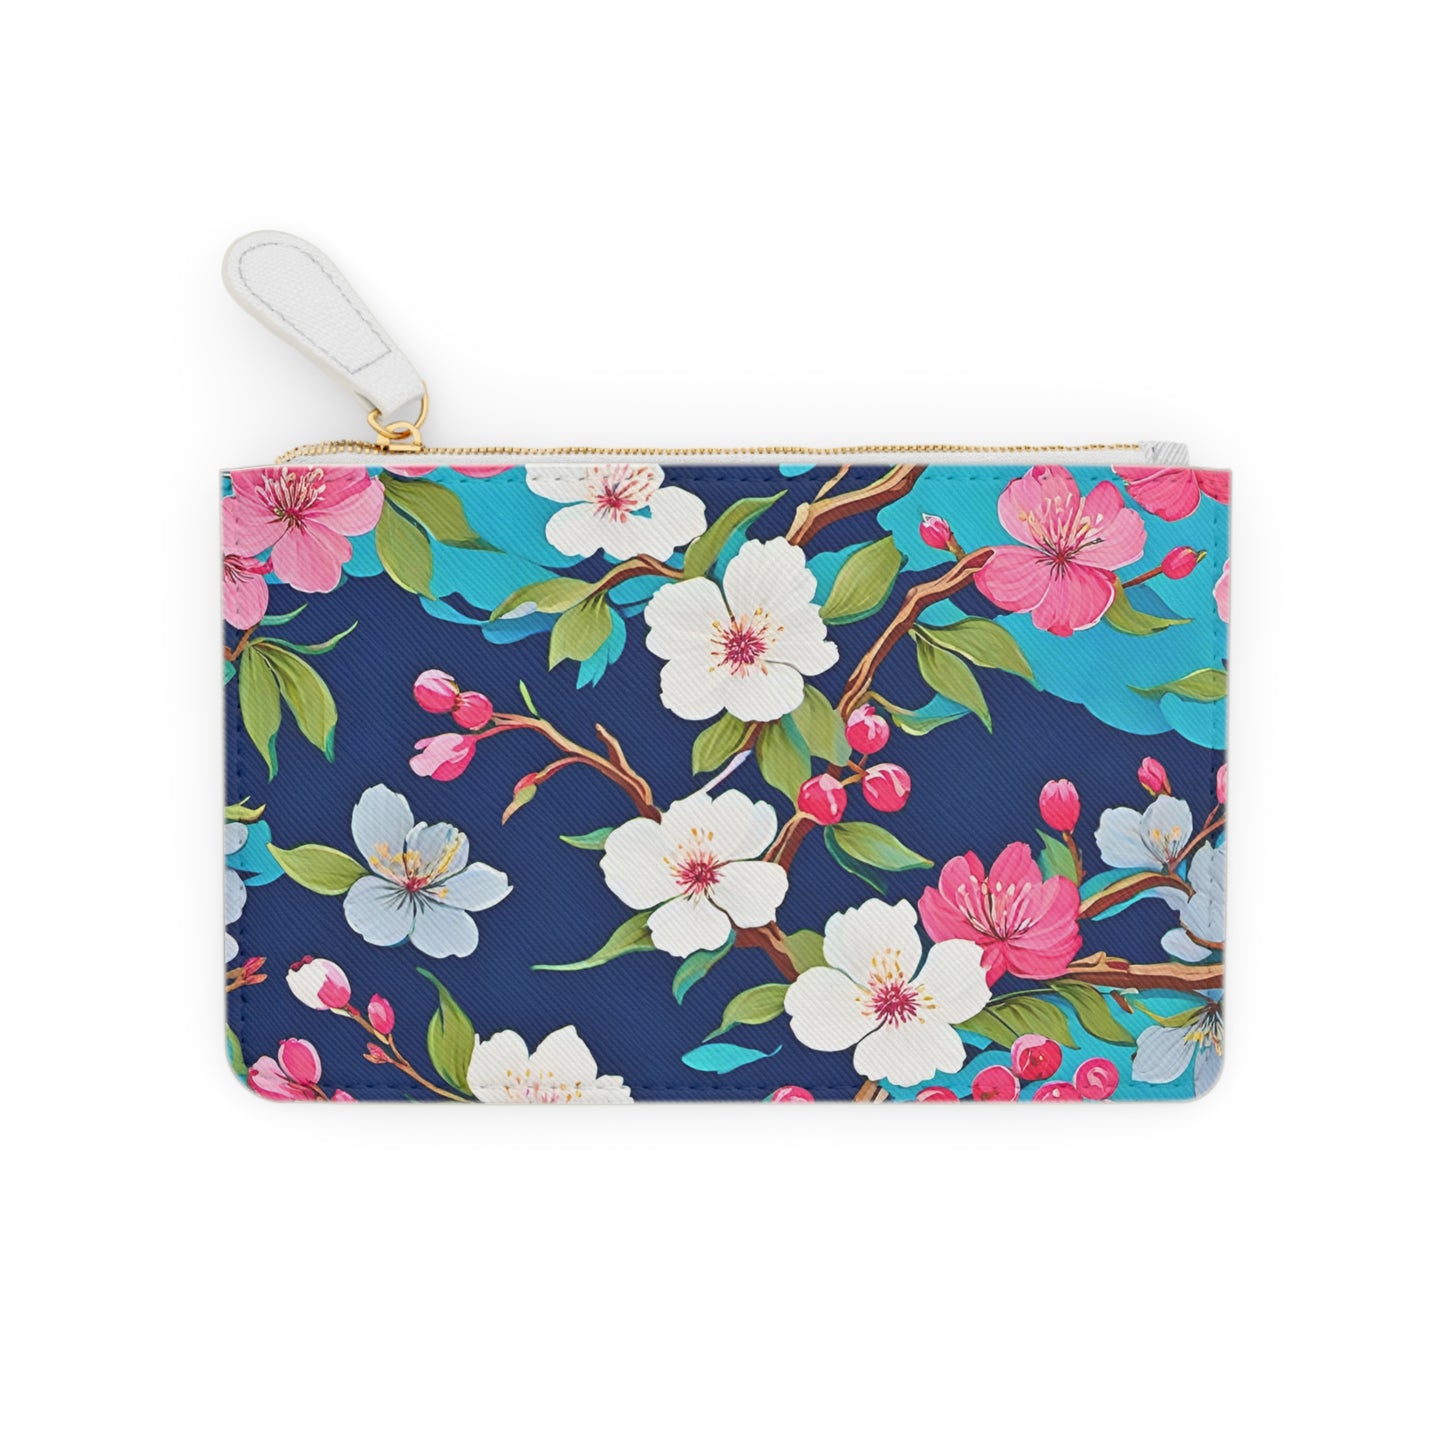 Cherry Blossoms Japanese Floral Pink Coin Purse Mini Pouch Clutch Bag